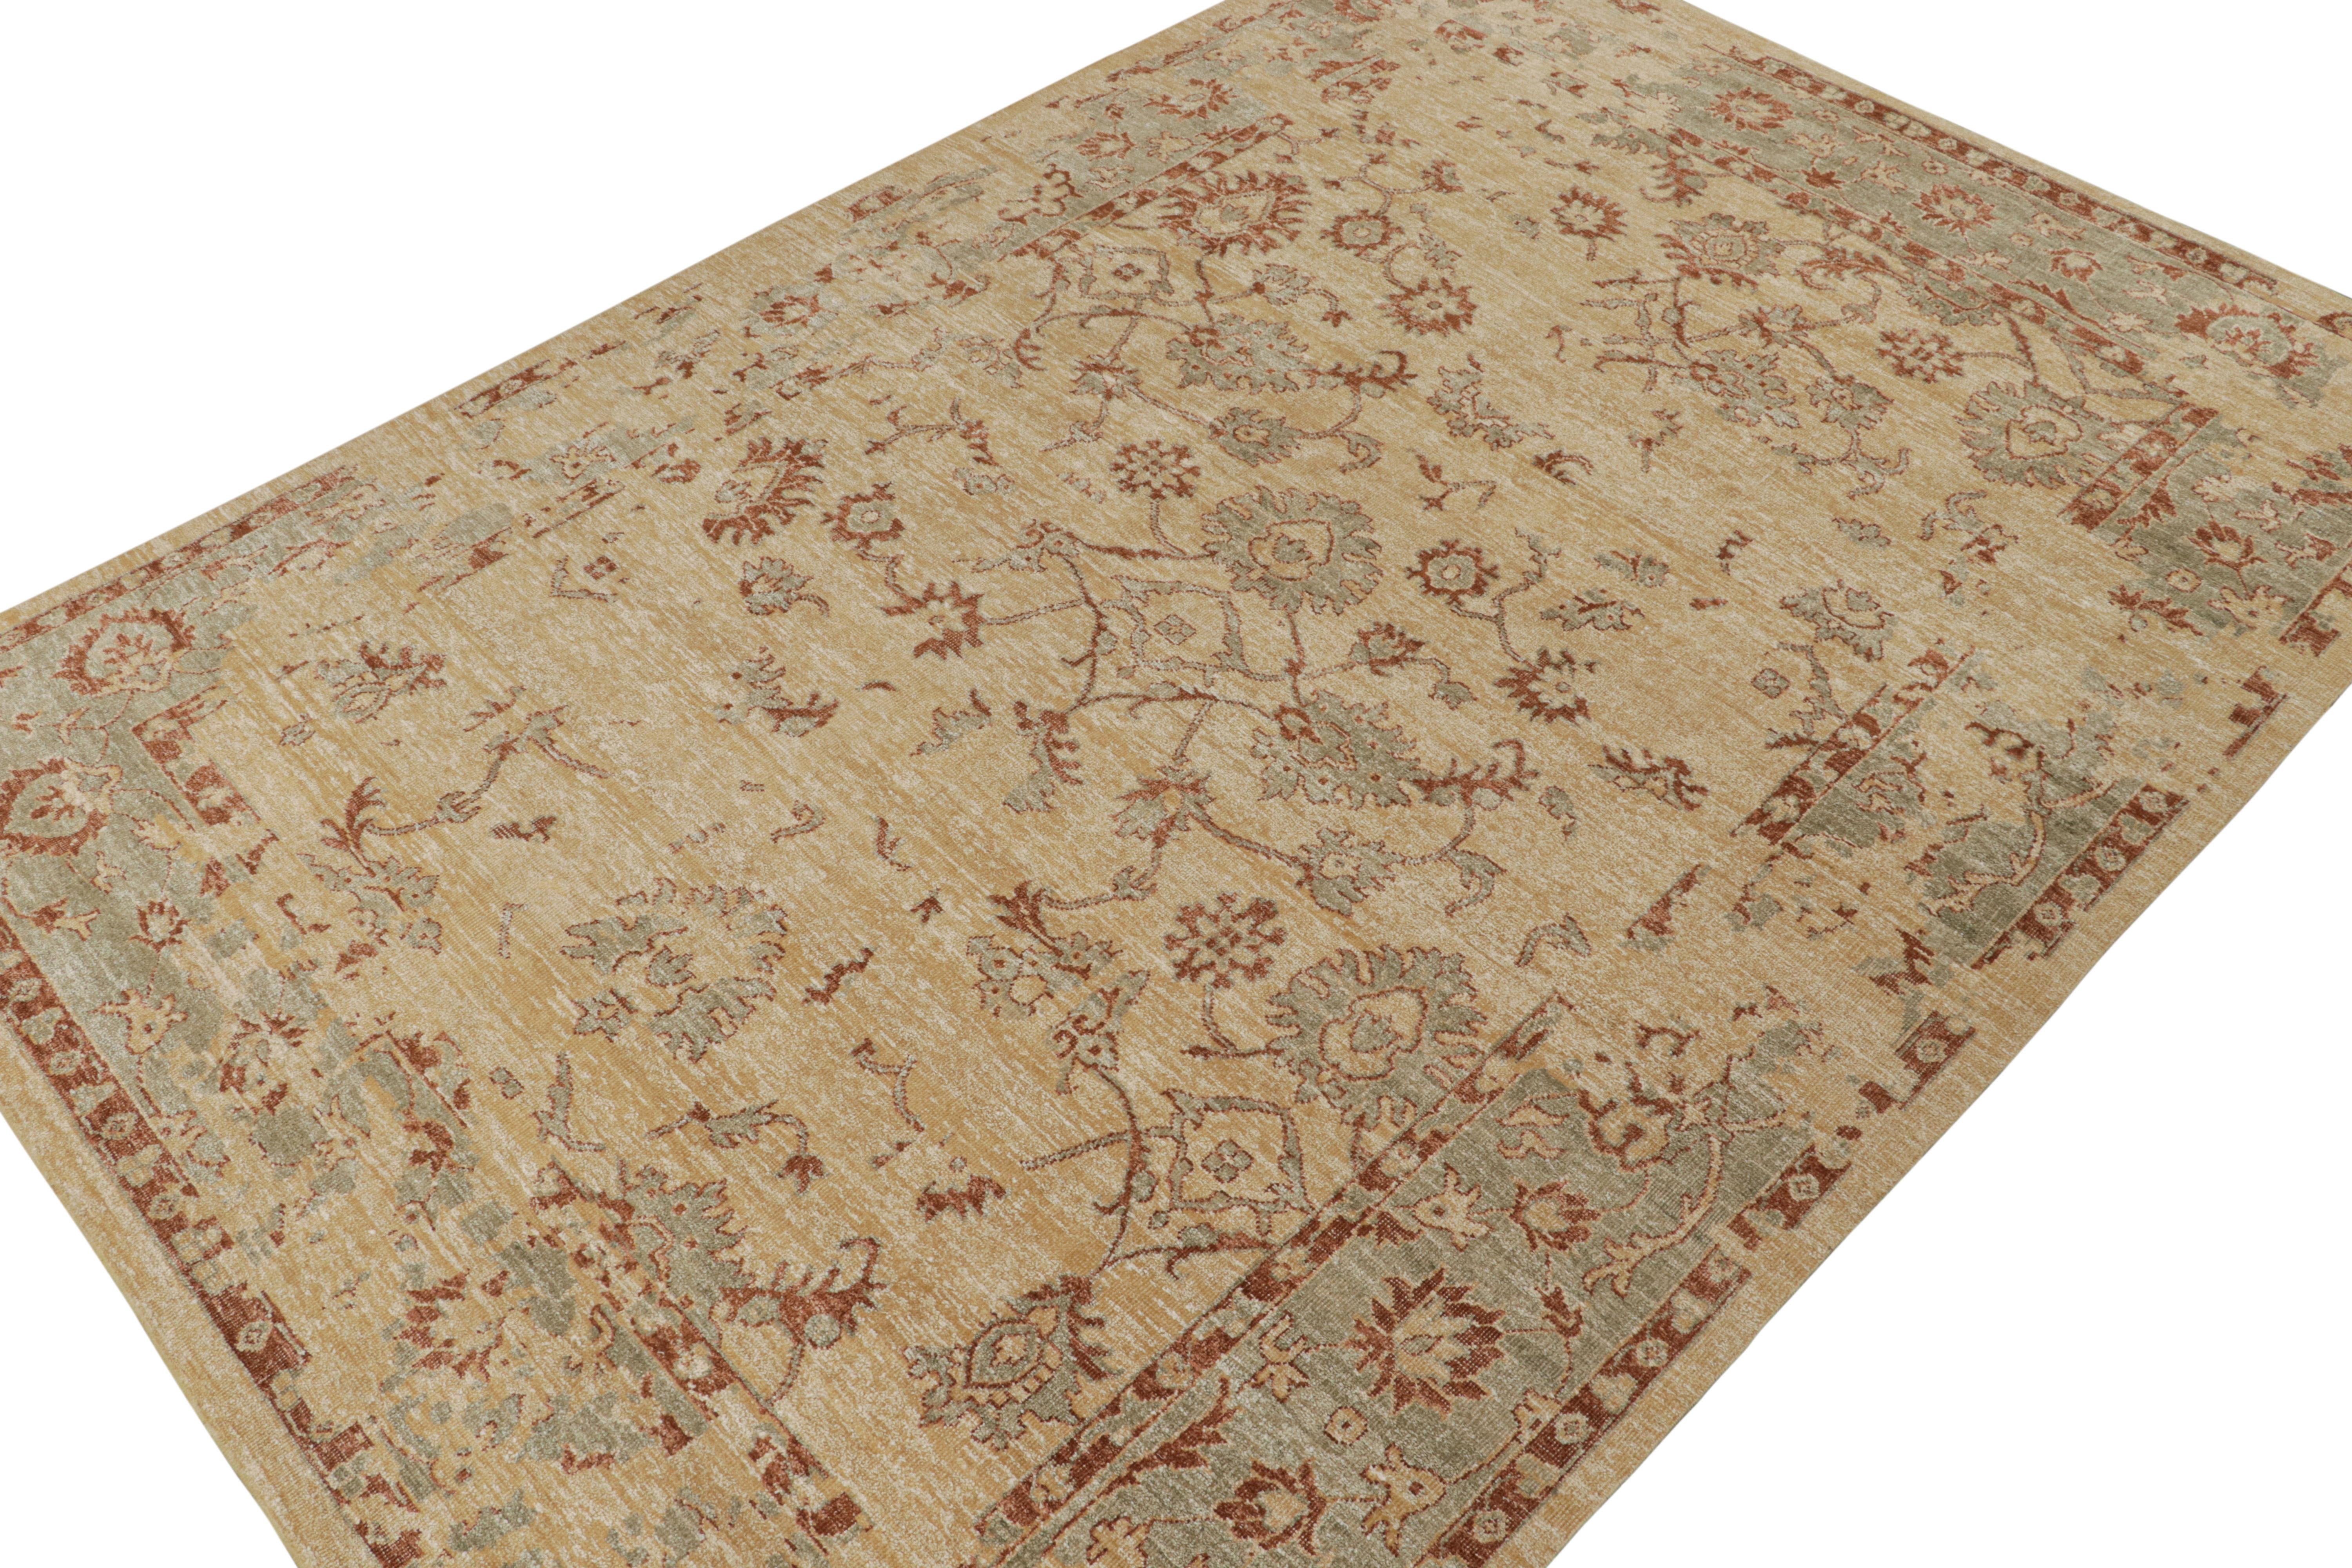 Hand-Knotted Rug & Kilim’s Oushak Style Rug in Gold, Red & Green Floral Patterns For Sale